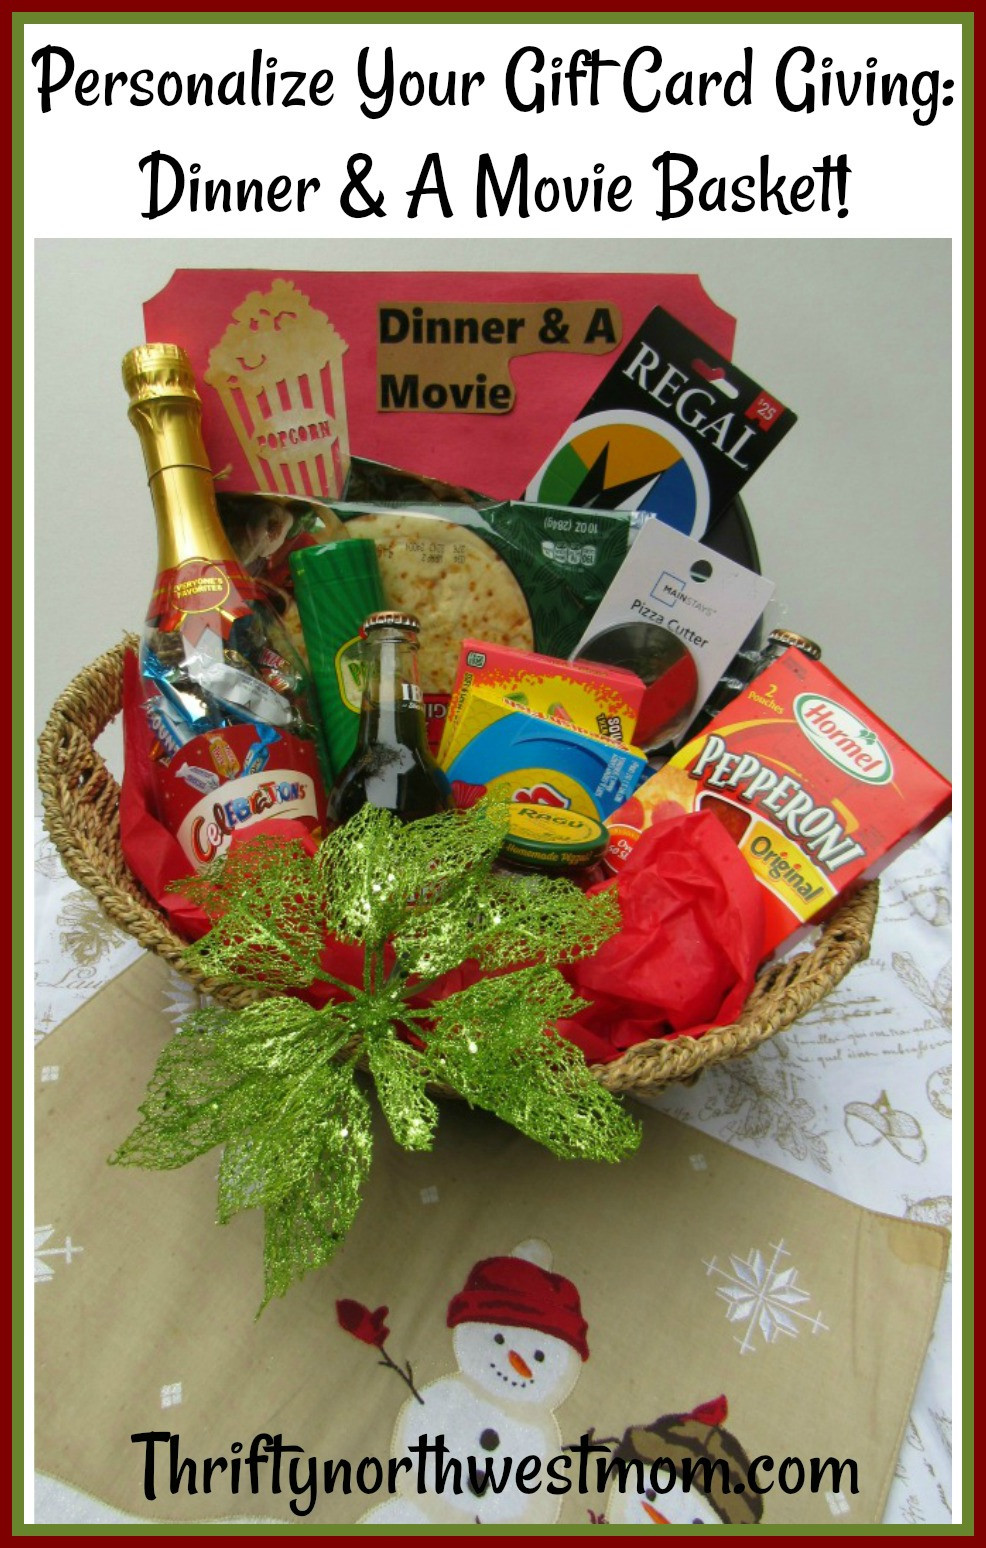 Movie Gift Basket Ideas
 Dinner & A Movie Gift Basket Idea How to Personalize